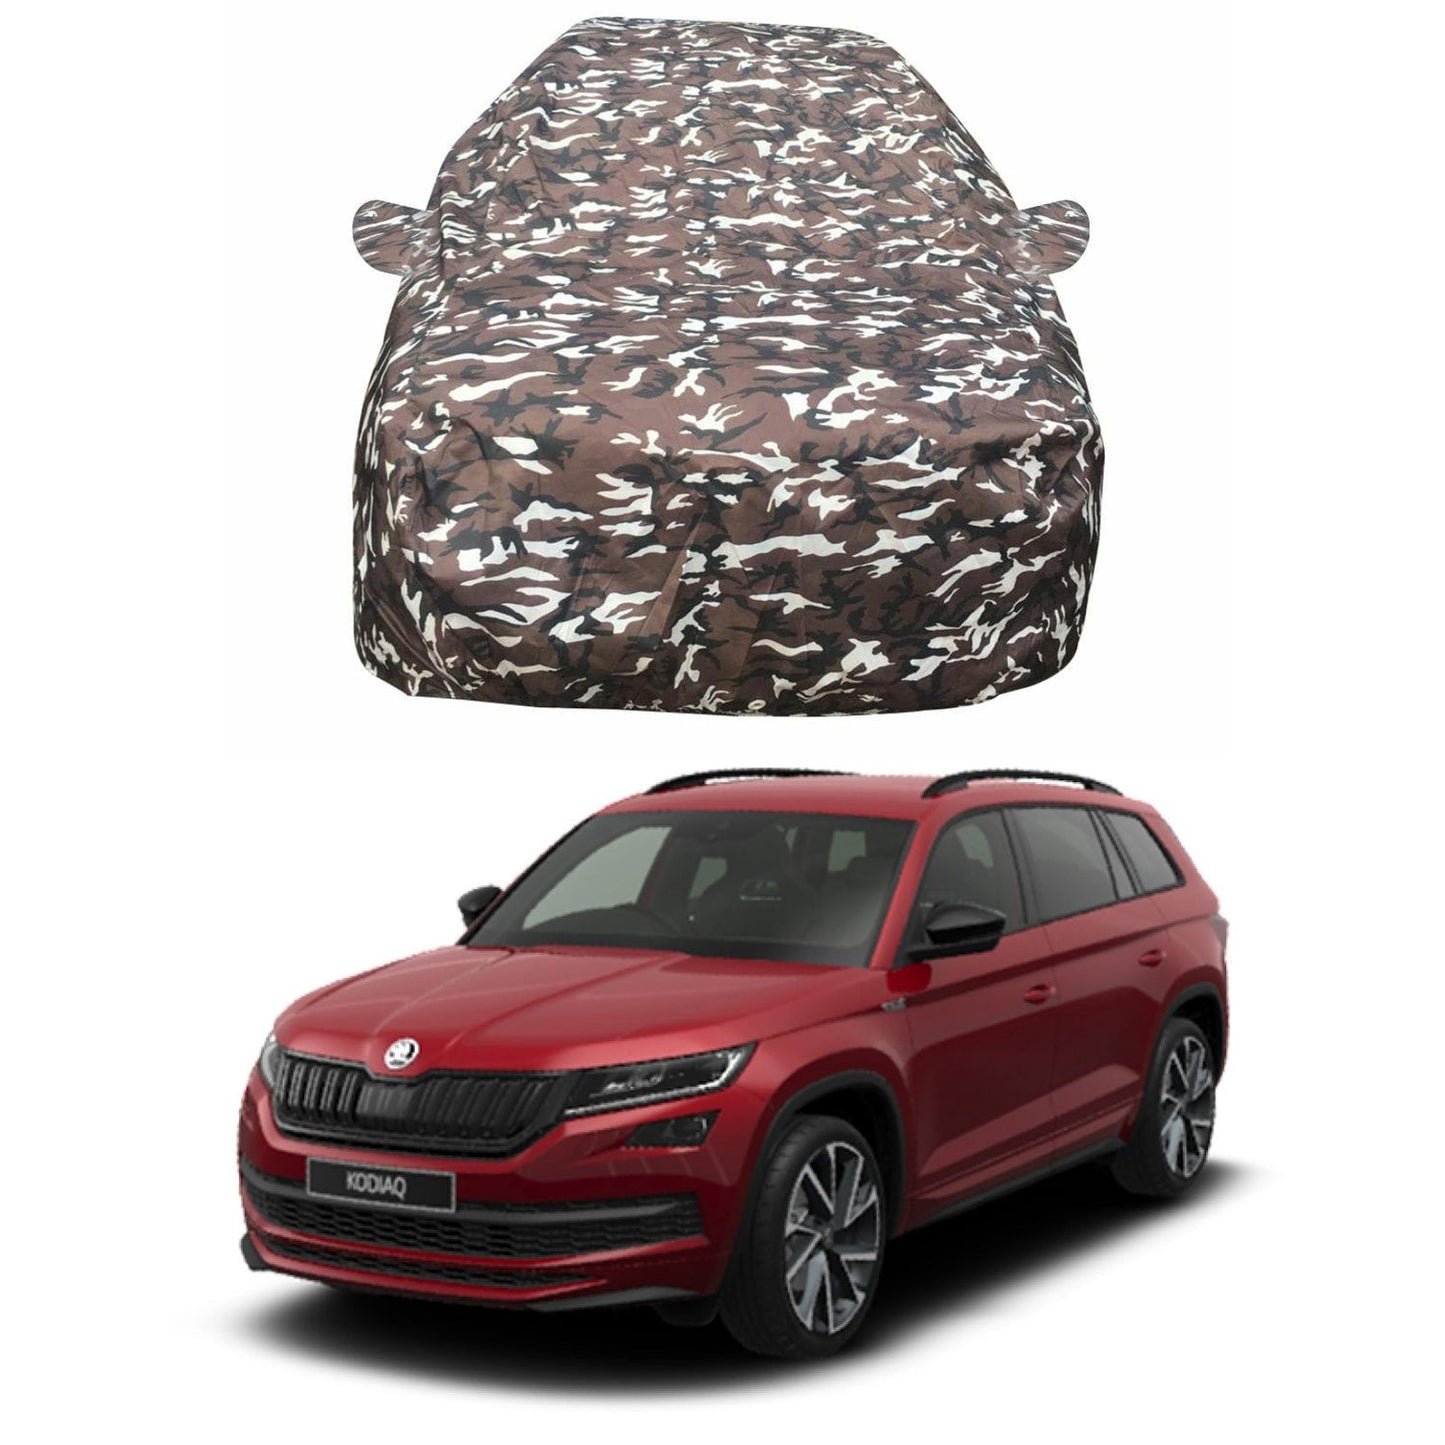 Oshotto Ranger Design Made of 100% Waterproof Fabric Multicolor Car Body Cover with Mirror Pockets For Skoda Kodiaq